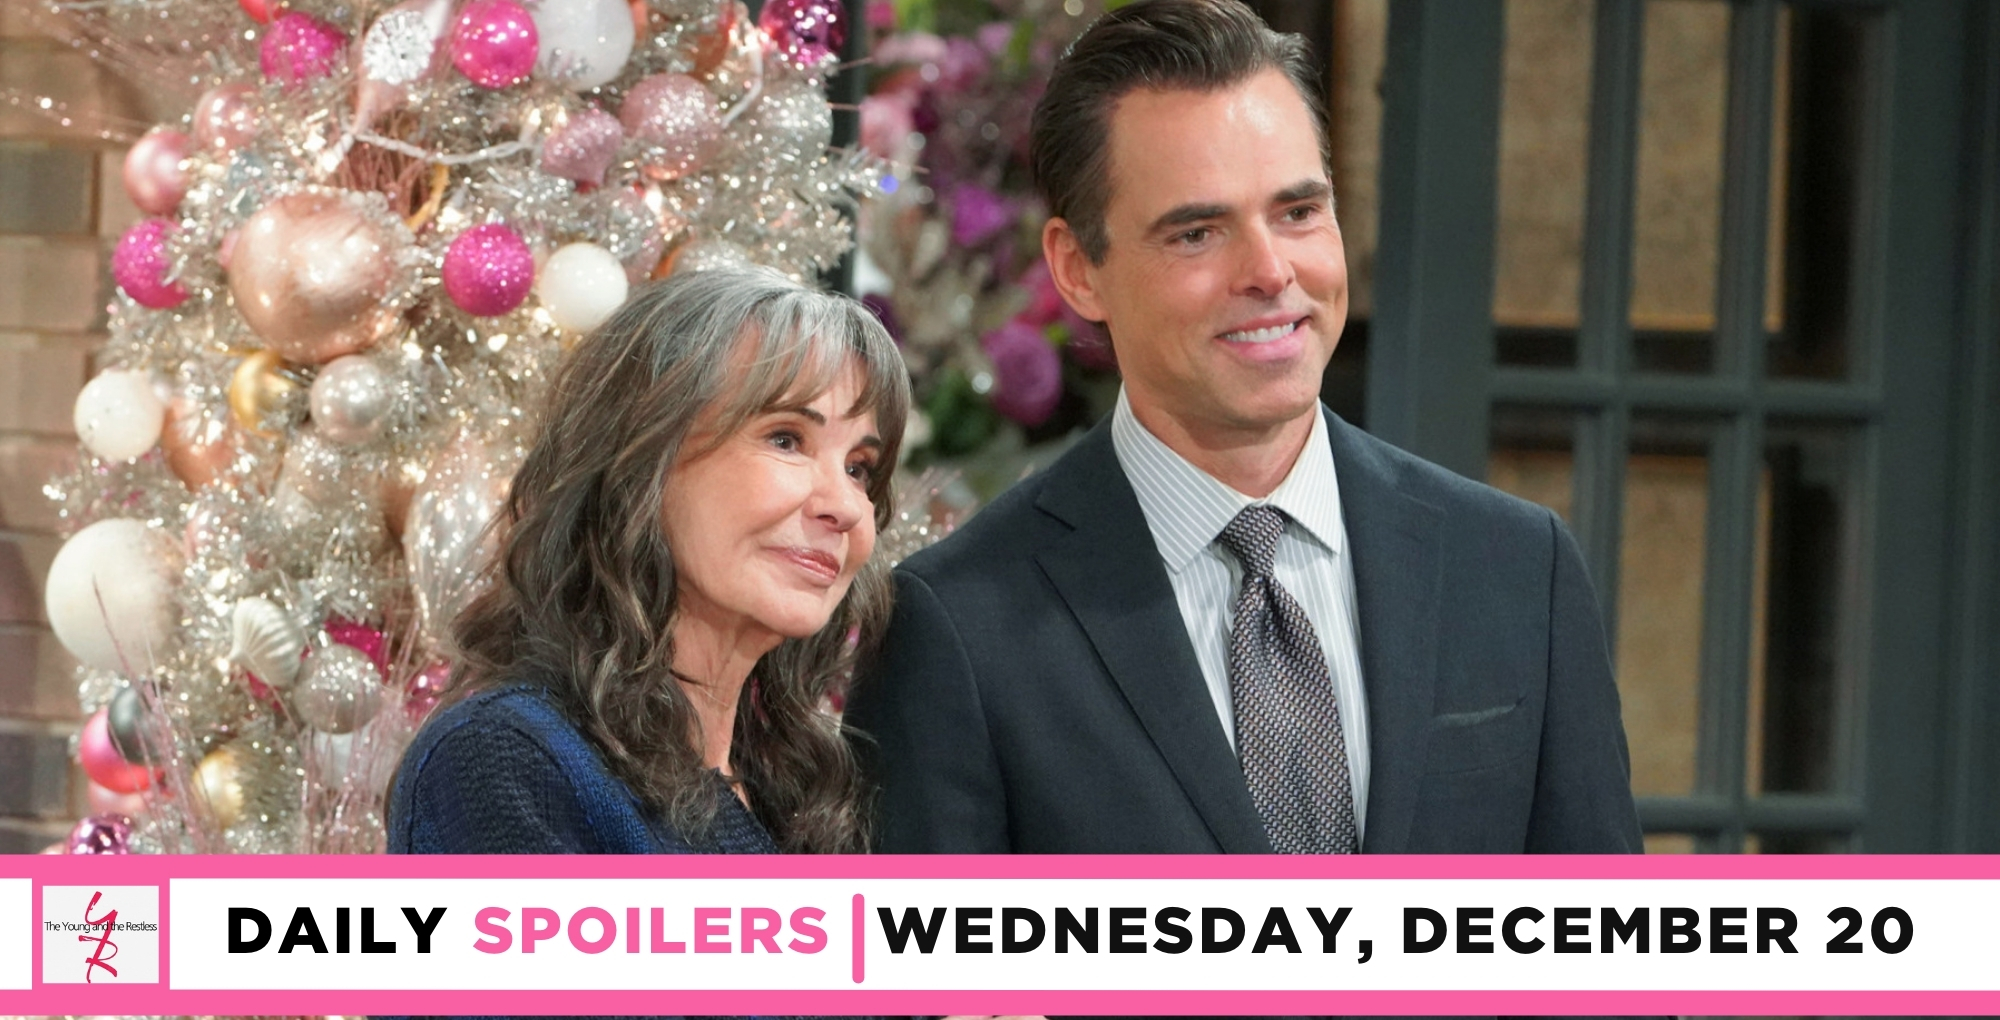 the young and the restless spoilers for december 20, 2023, episode 12770, has jill and billy abbott near a christmas tree.